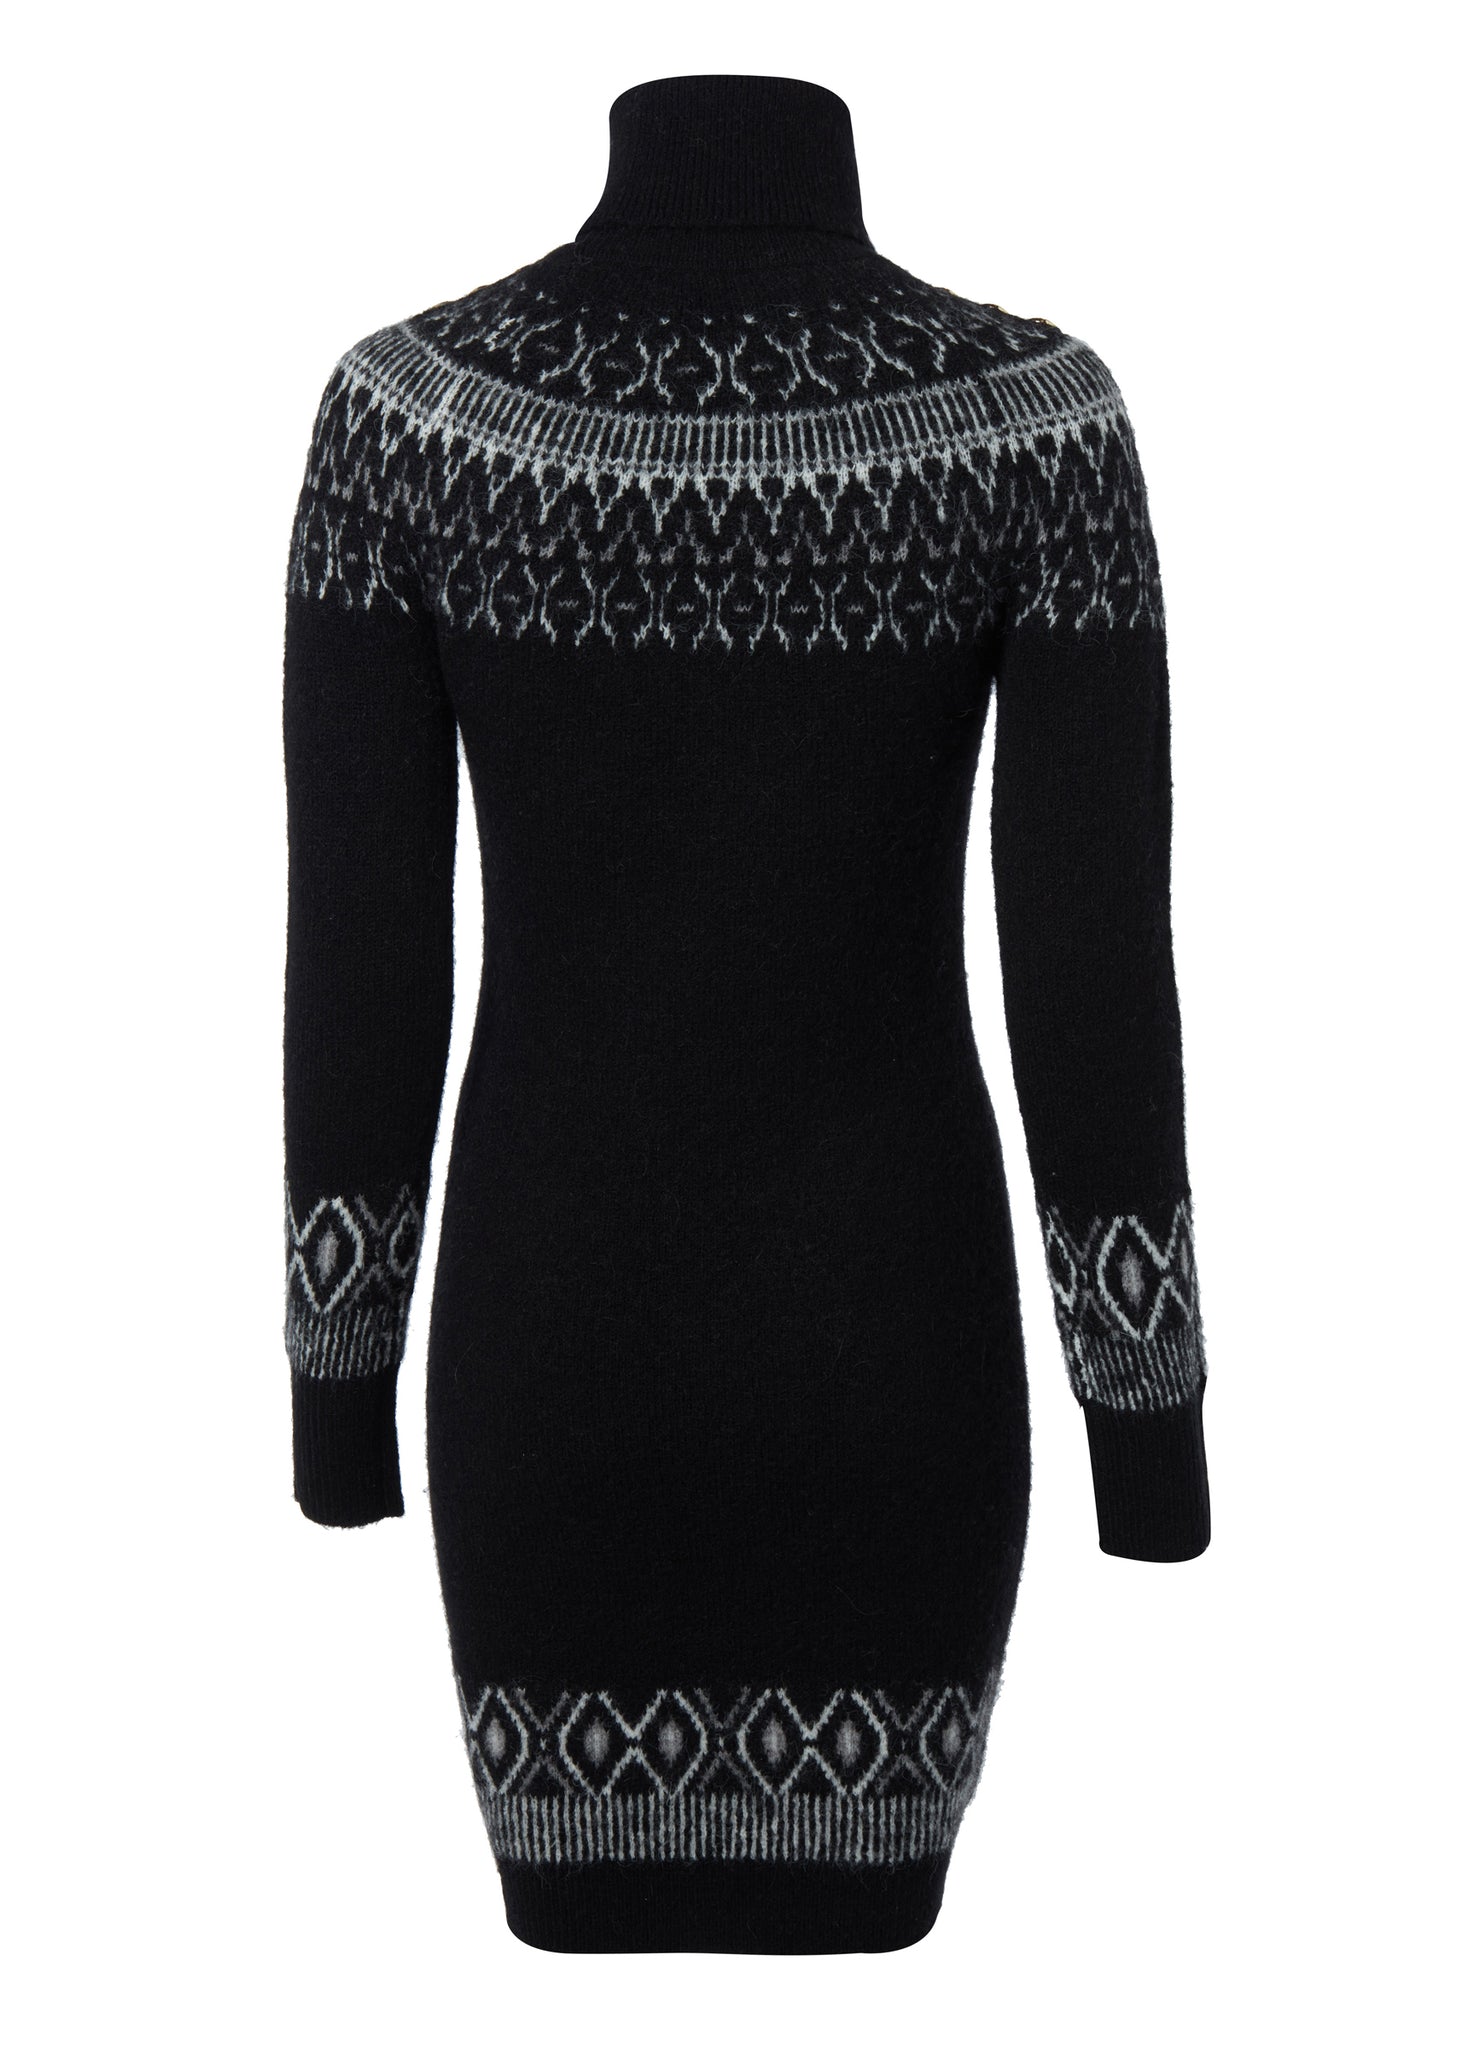 back of womens black roll neck jumper dress with fairisle knit in white and grey around the shoulders hemline and cuffs and a ribbed hem with gold buttons on shoulders and cuffs